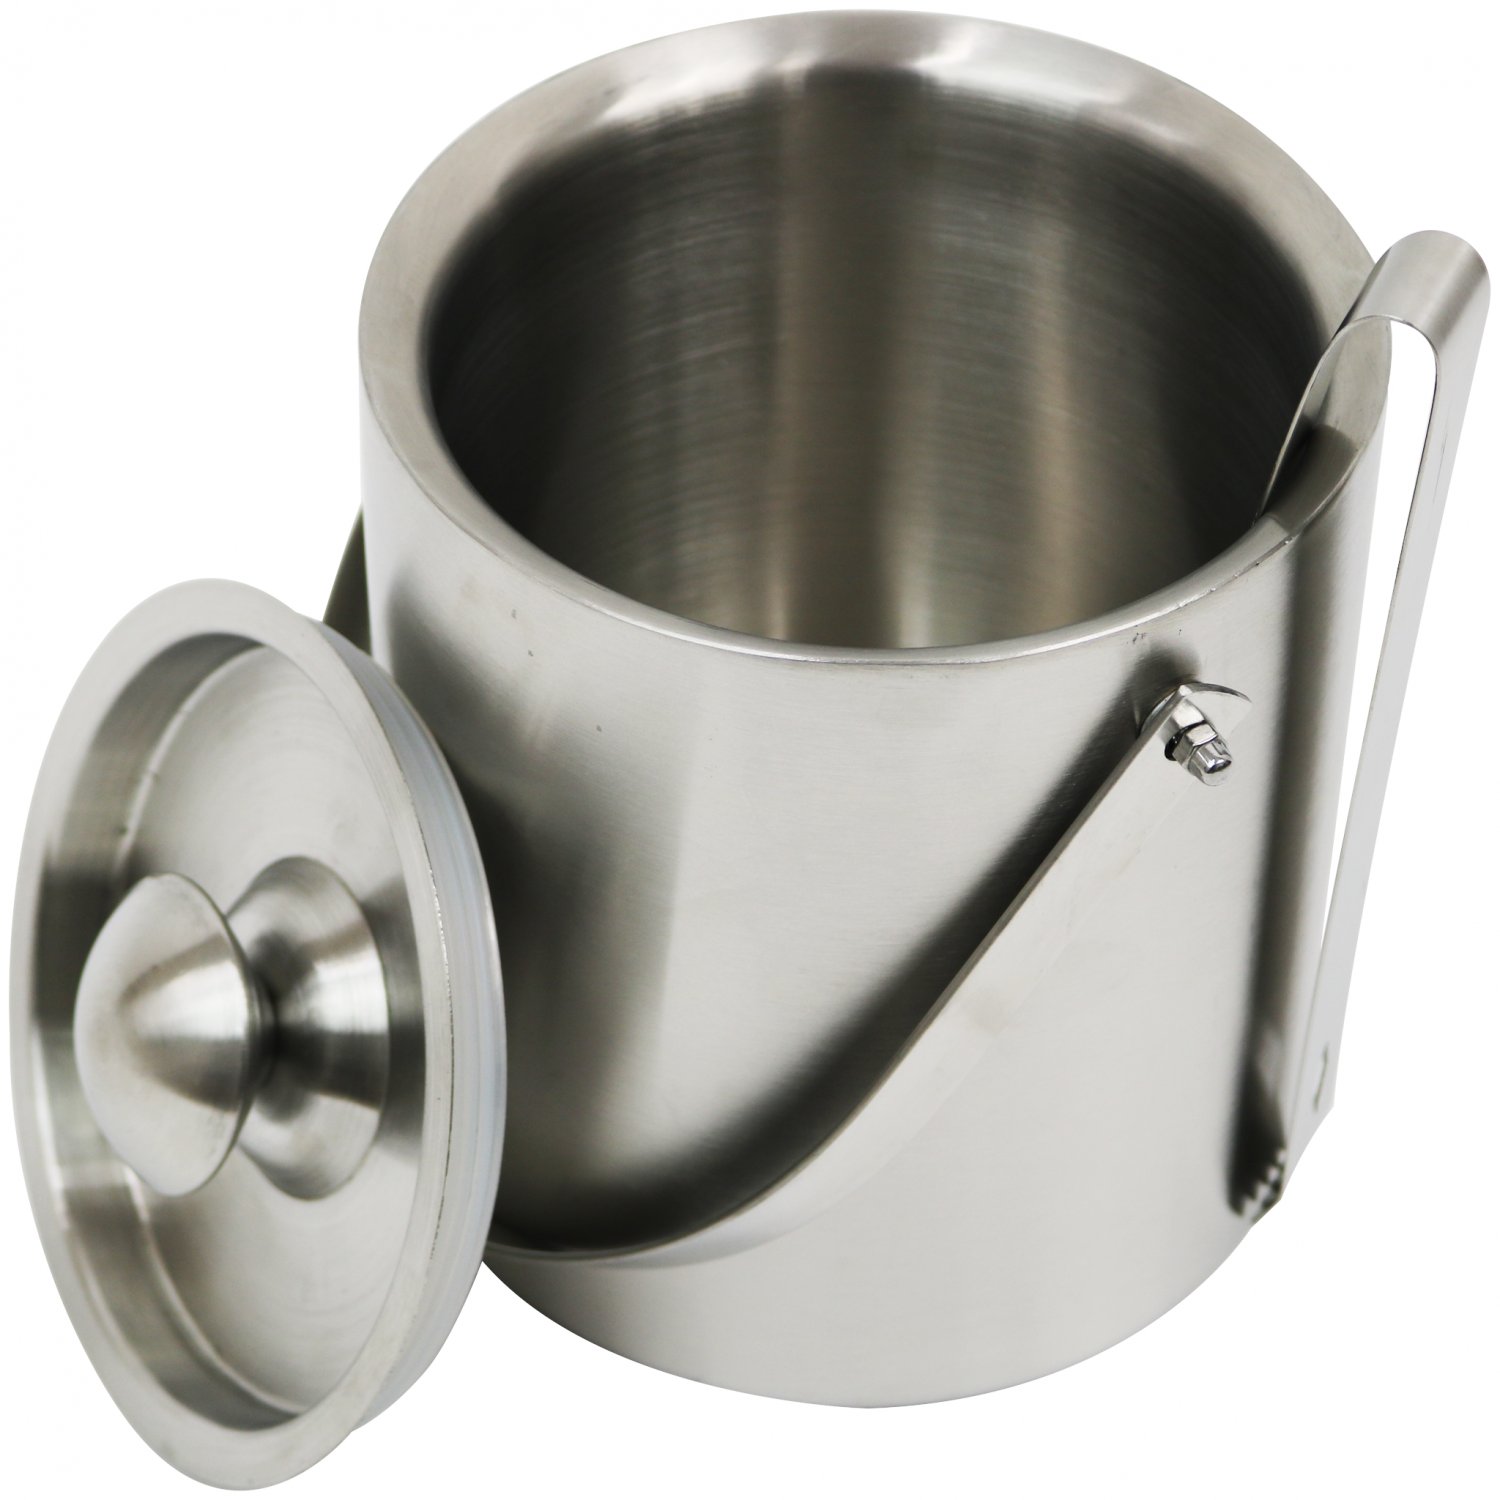 2L Ice Buckets with Stainless Steel Ice Tongs,Double Wall Ice Bucket 